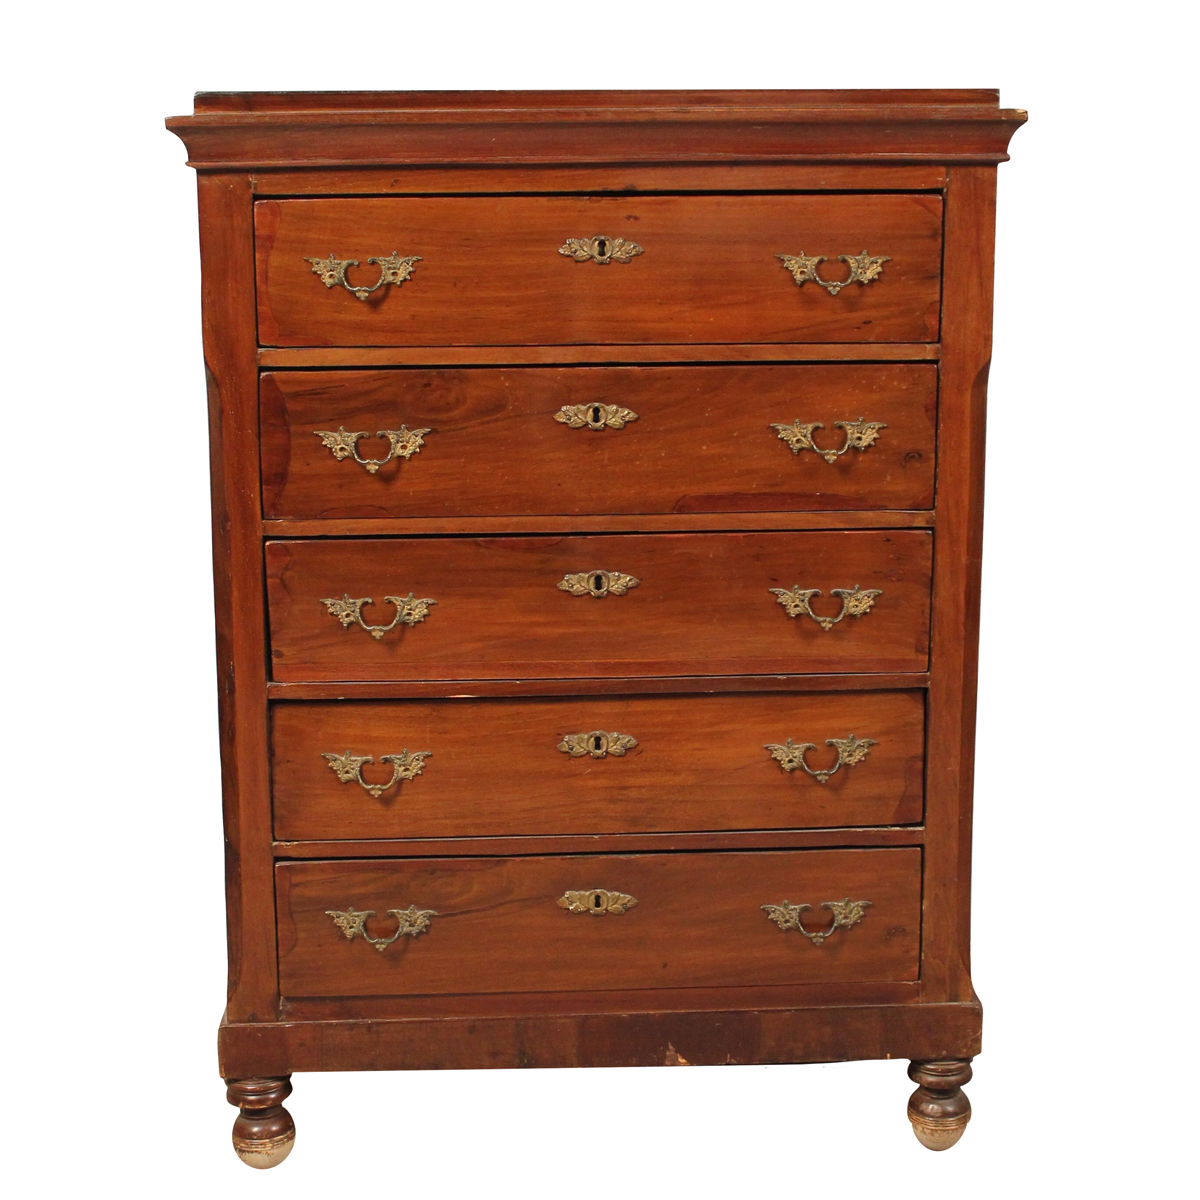 CANTARANO A CINQUE CASSETTI - COMMODE WITH FIVE DRAWERS